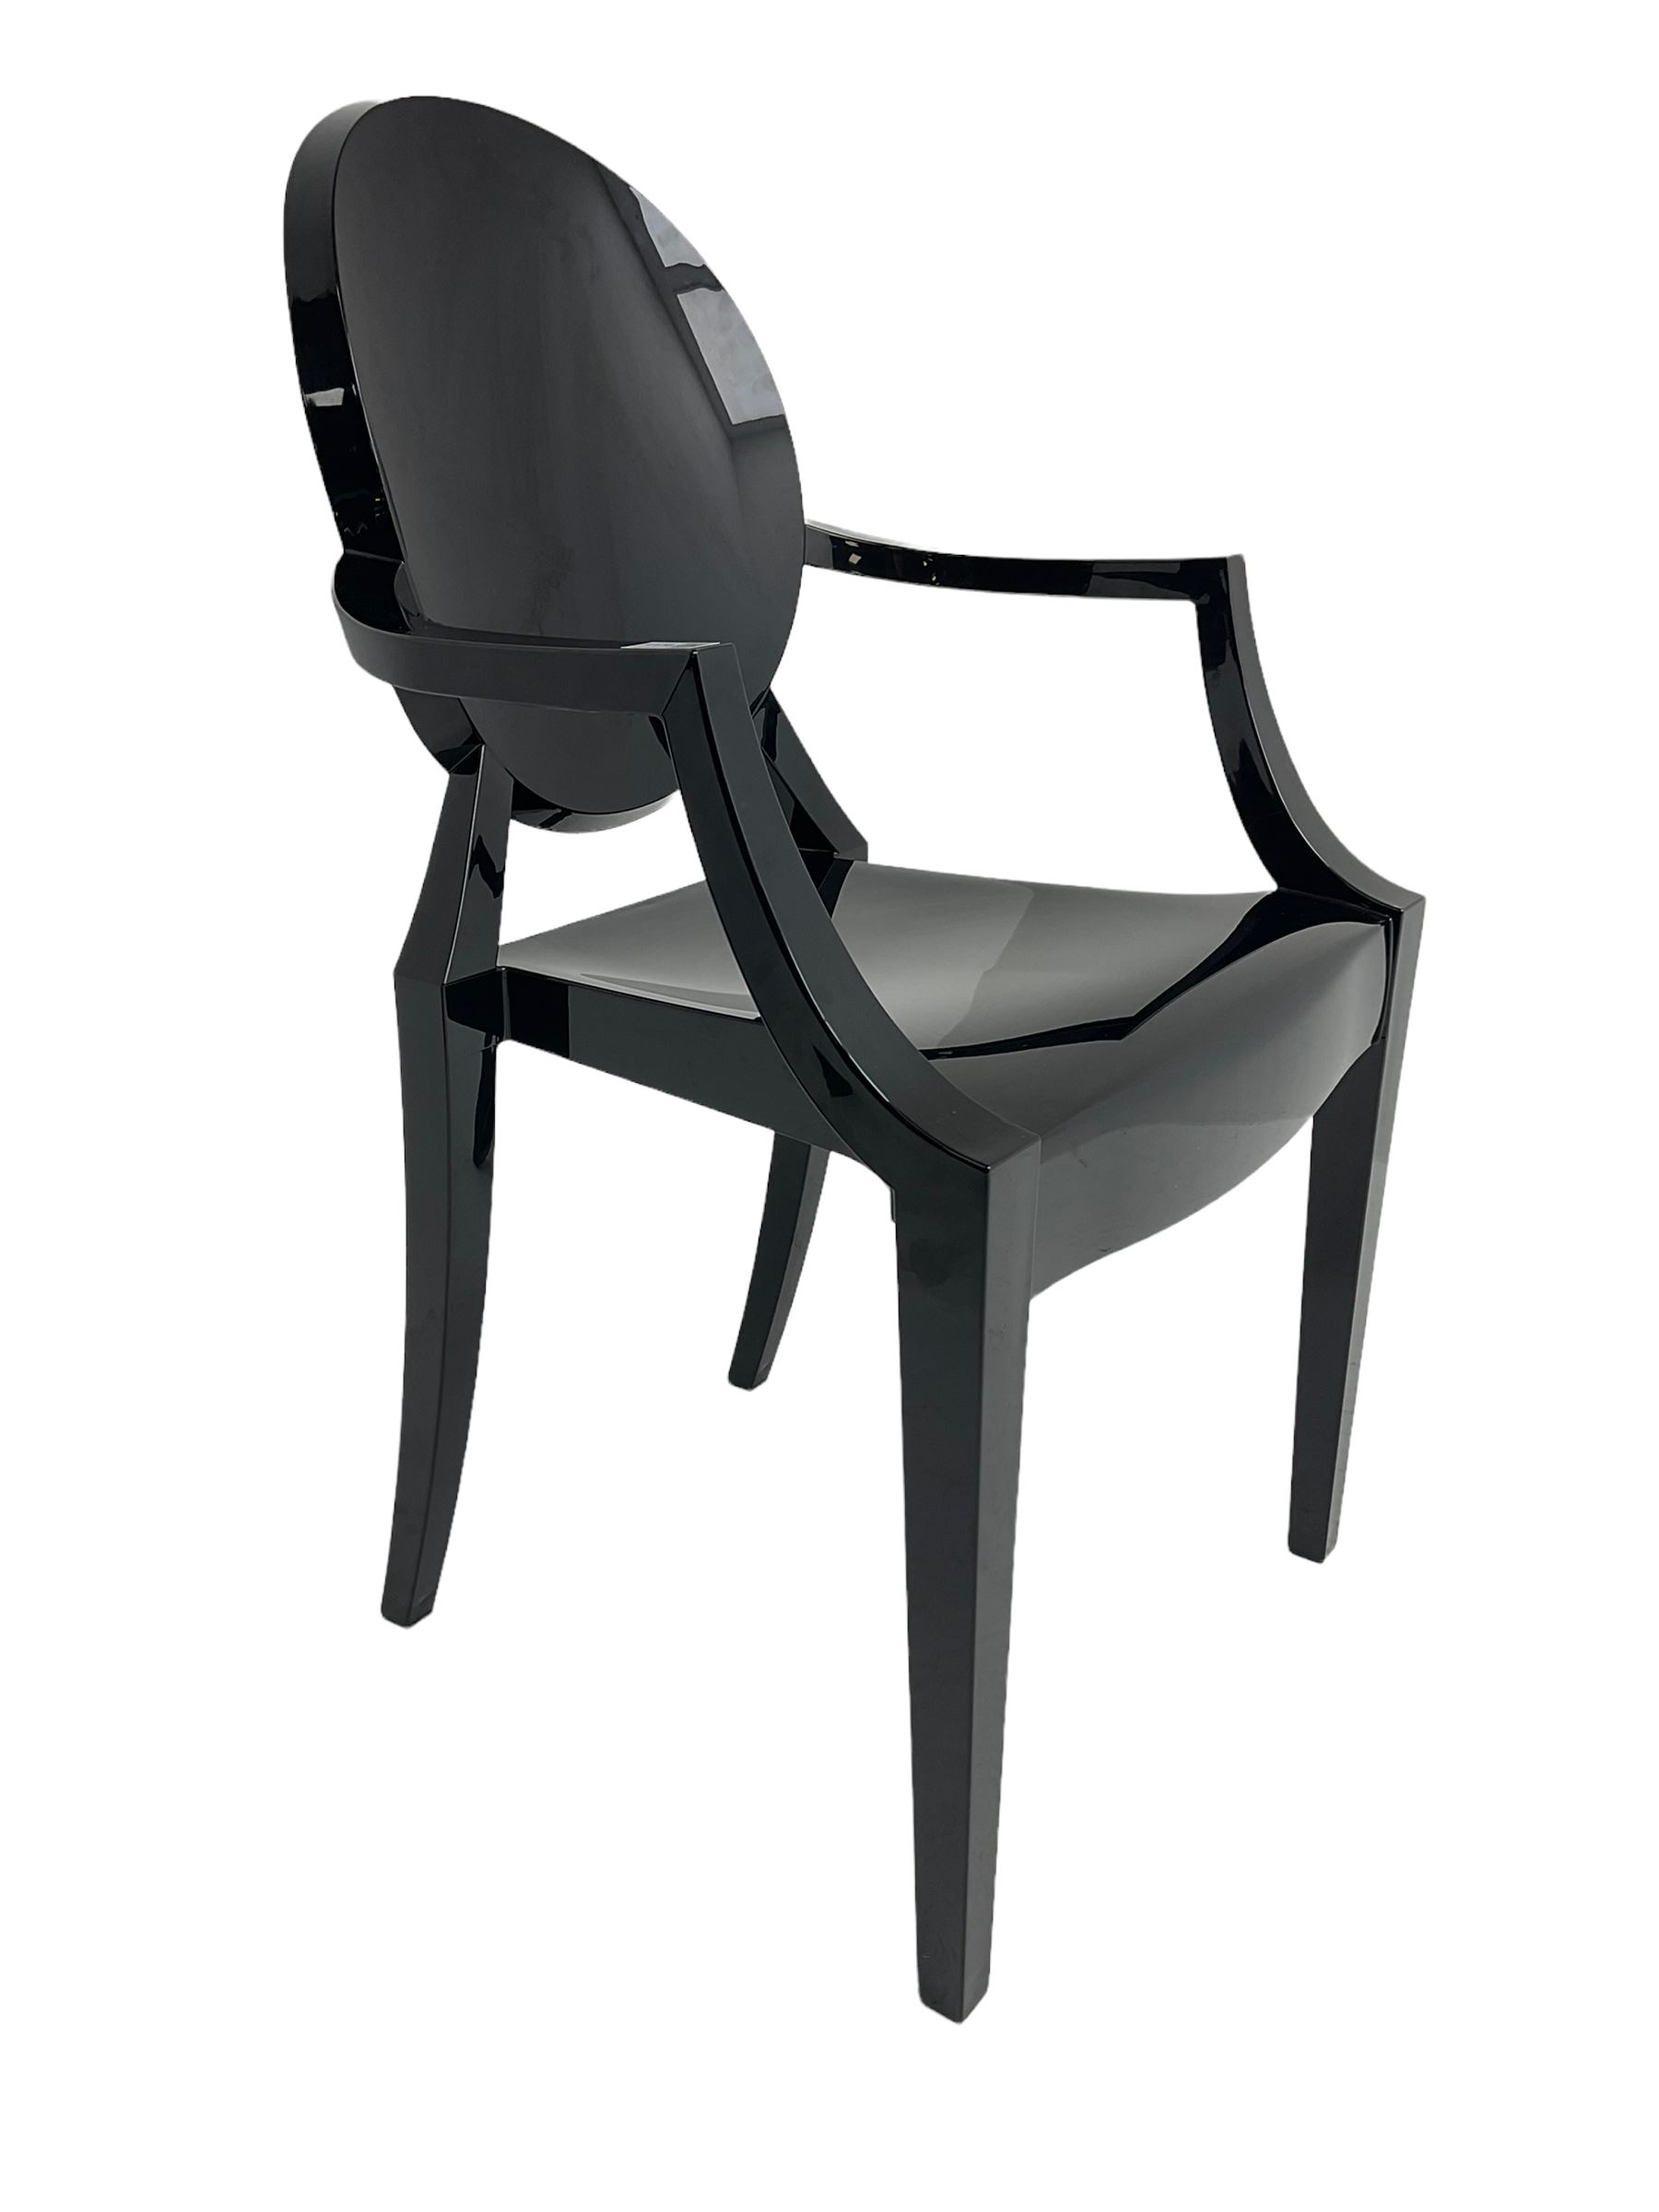 Philippe Starck for Kartell - 'Louis Ghost' chair - Image 3 of 6